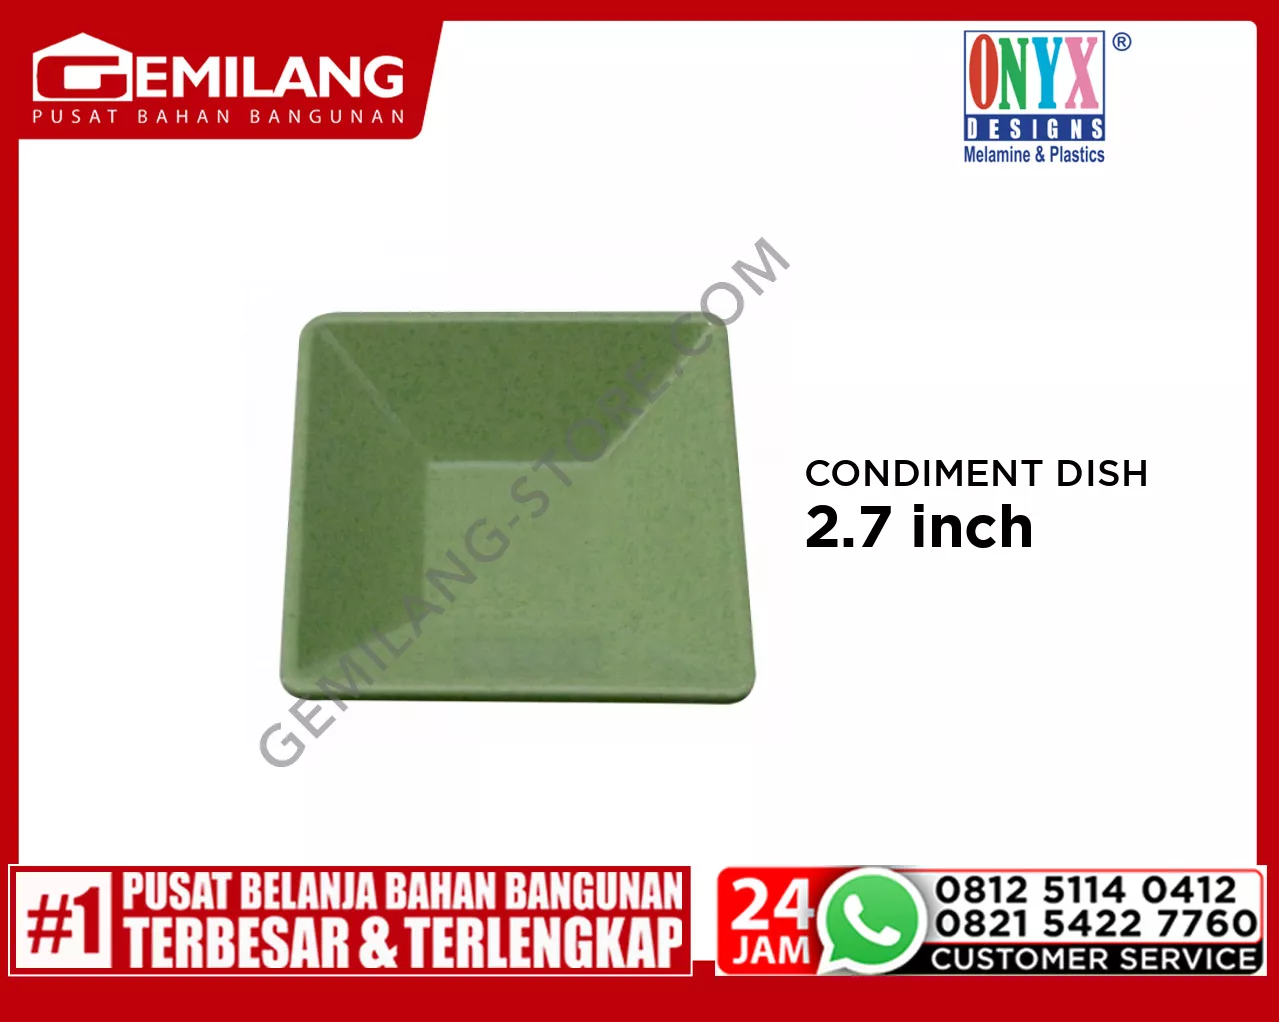 ONYX SQUARE CONDIMENT DISH GES002 2.7inch